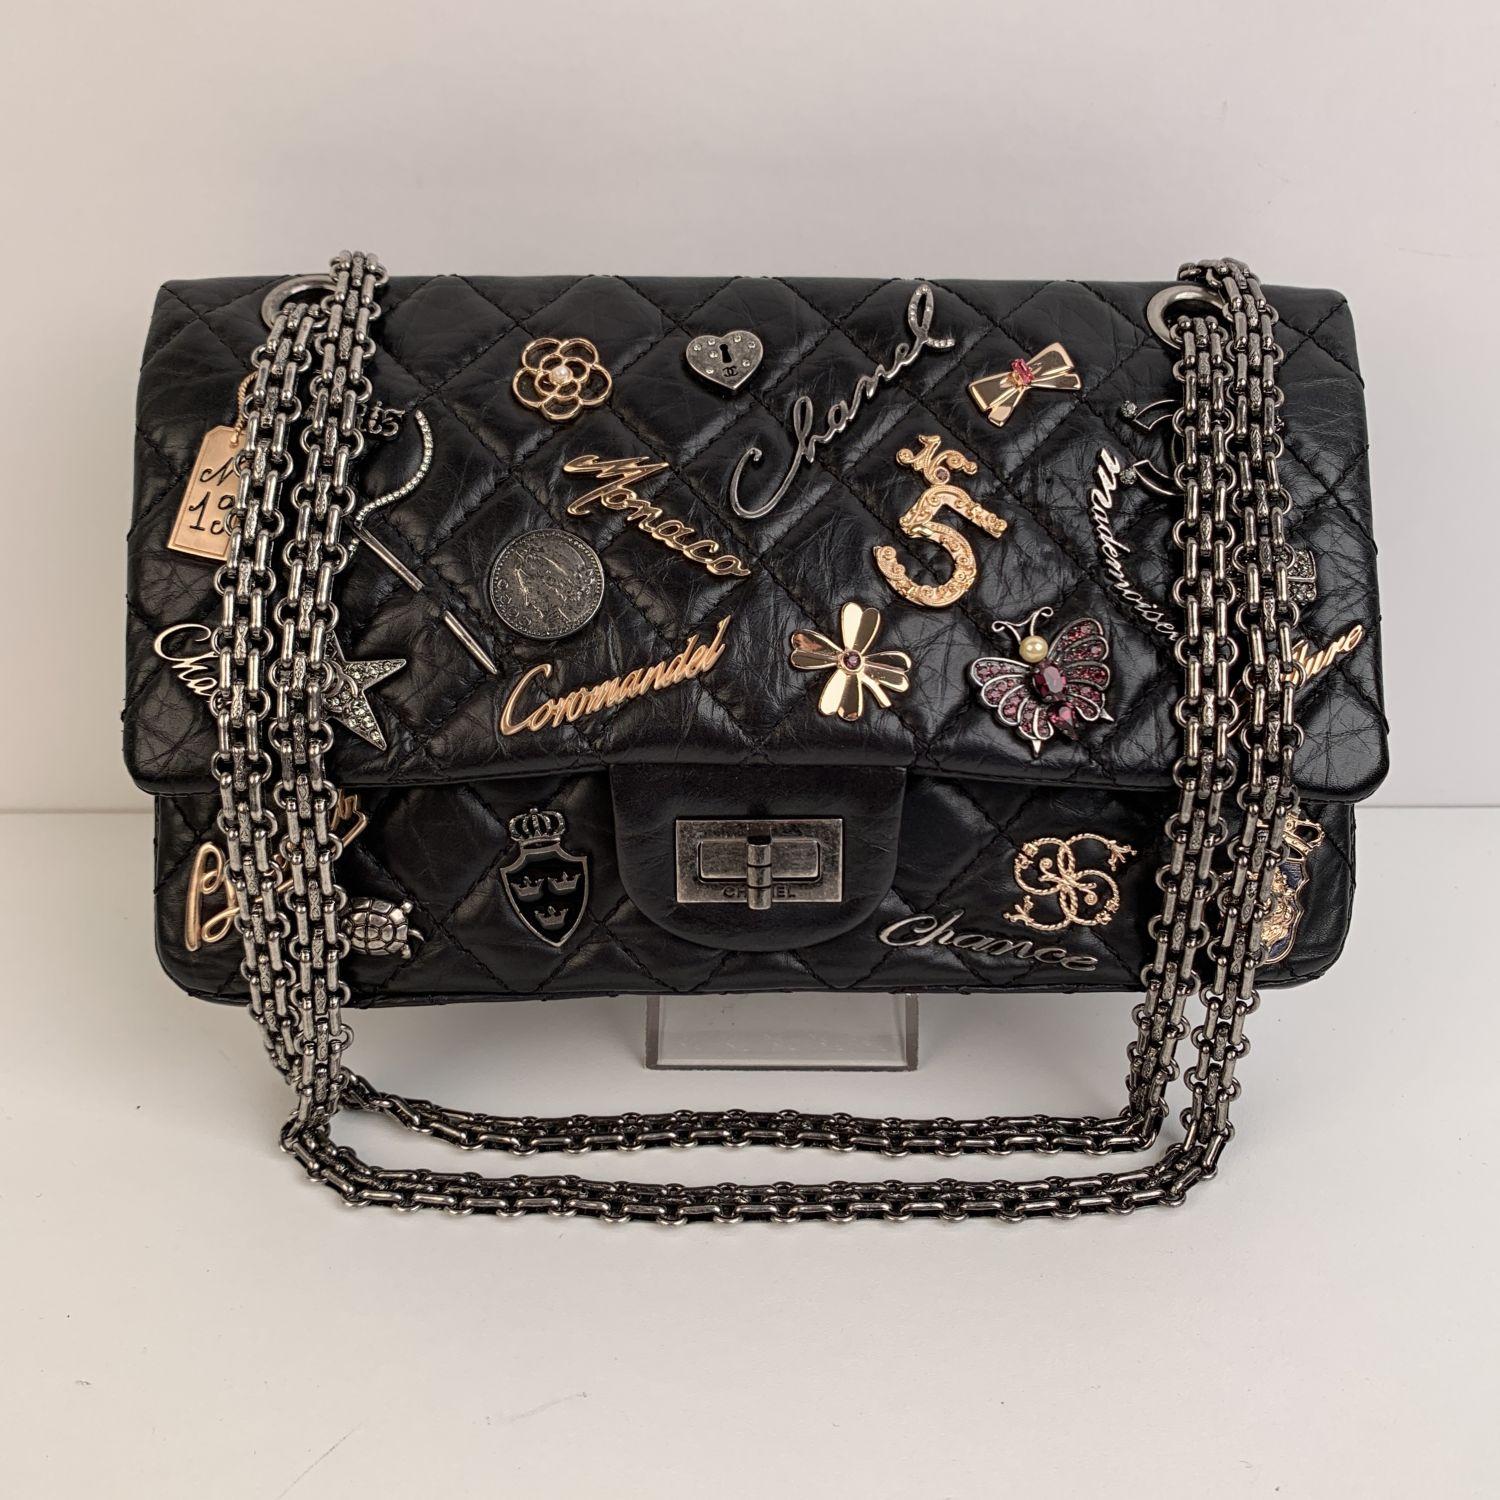 Beautiful Chanel '2.55 Reissue Flap Limited Edition - Lucky Charms' Shoulder Bag. The bag is crafted in black quilted leather embellished with different Chanel iconic metal charms applications. It features the Mademoiselle turnlock closure and